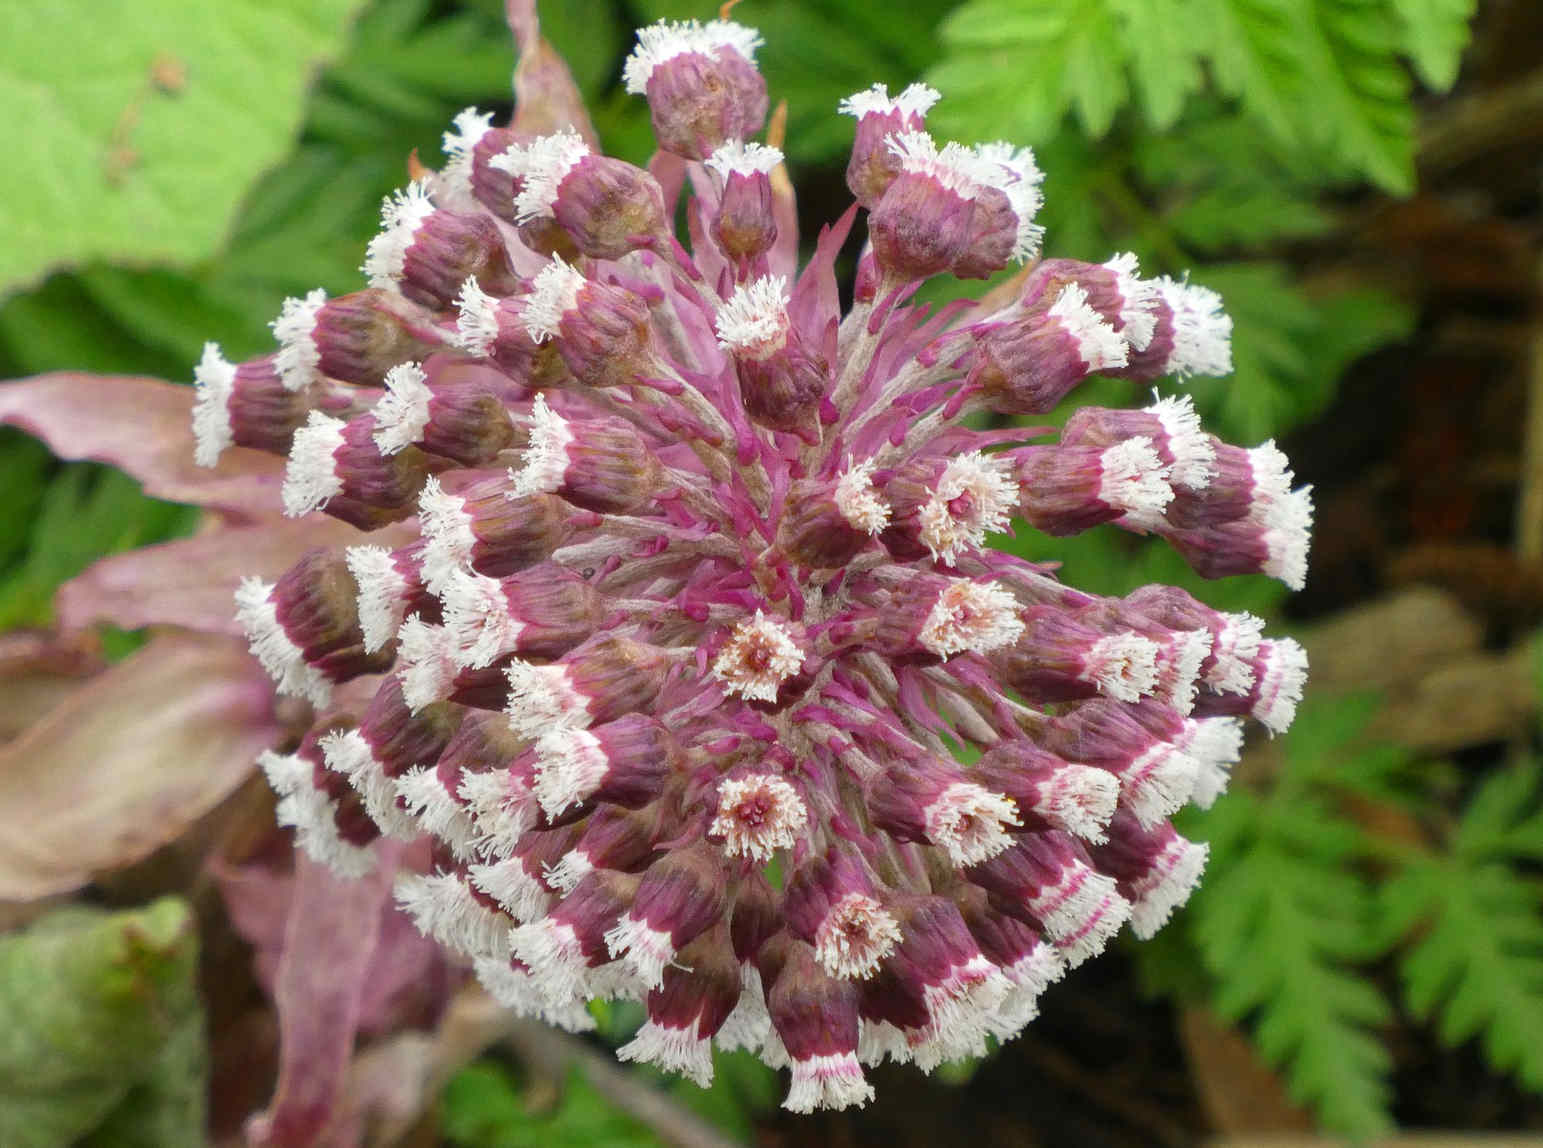 butterbur pink and white flower